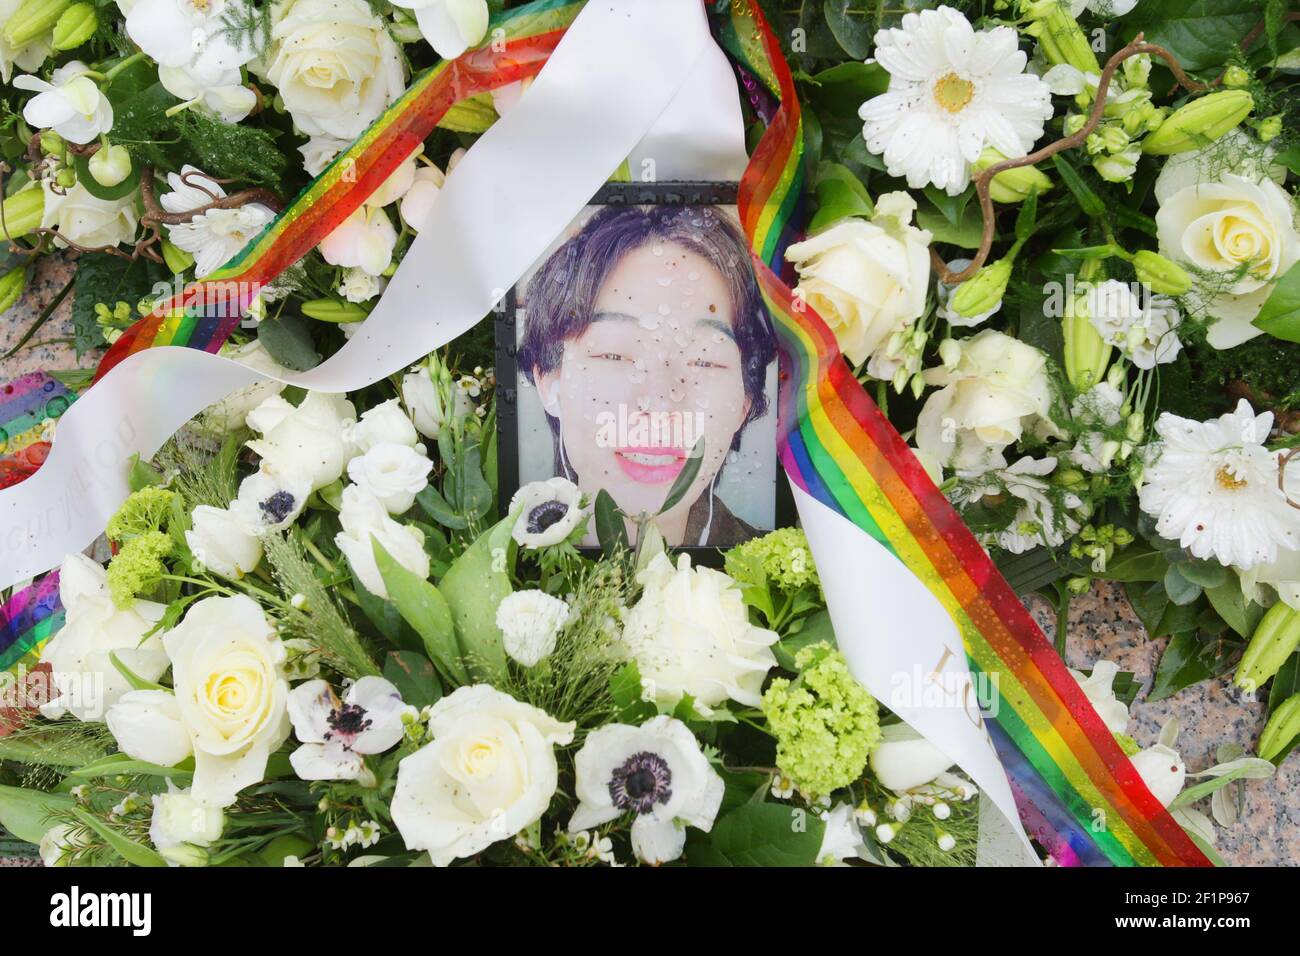 A picture of the activist Xingshun Zhou and flowers placed in memory by LGBT Asylum Support at the Homomonument on March 9, 2021 in Amsterdam, Netherlands. Xingshun Zhou (Marlon) an Chinese activist transwoman 23-year old forced to move from China to seek asylum in the Netherlands, because of the systematic homophobic and sexist repression against LGBTQIA  Community, died by suicide on February 26, 2021 at Echt village after her asylum application was denied by immigration authorities in the Netherlands. (Photo by Paulo Amorim/Sipa USA) Stock Photo